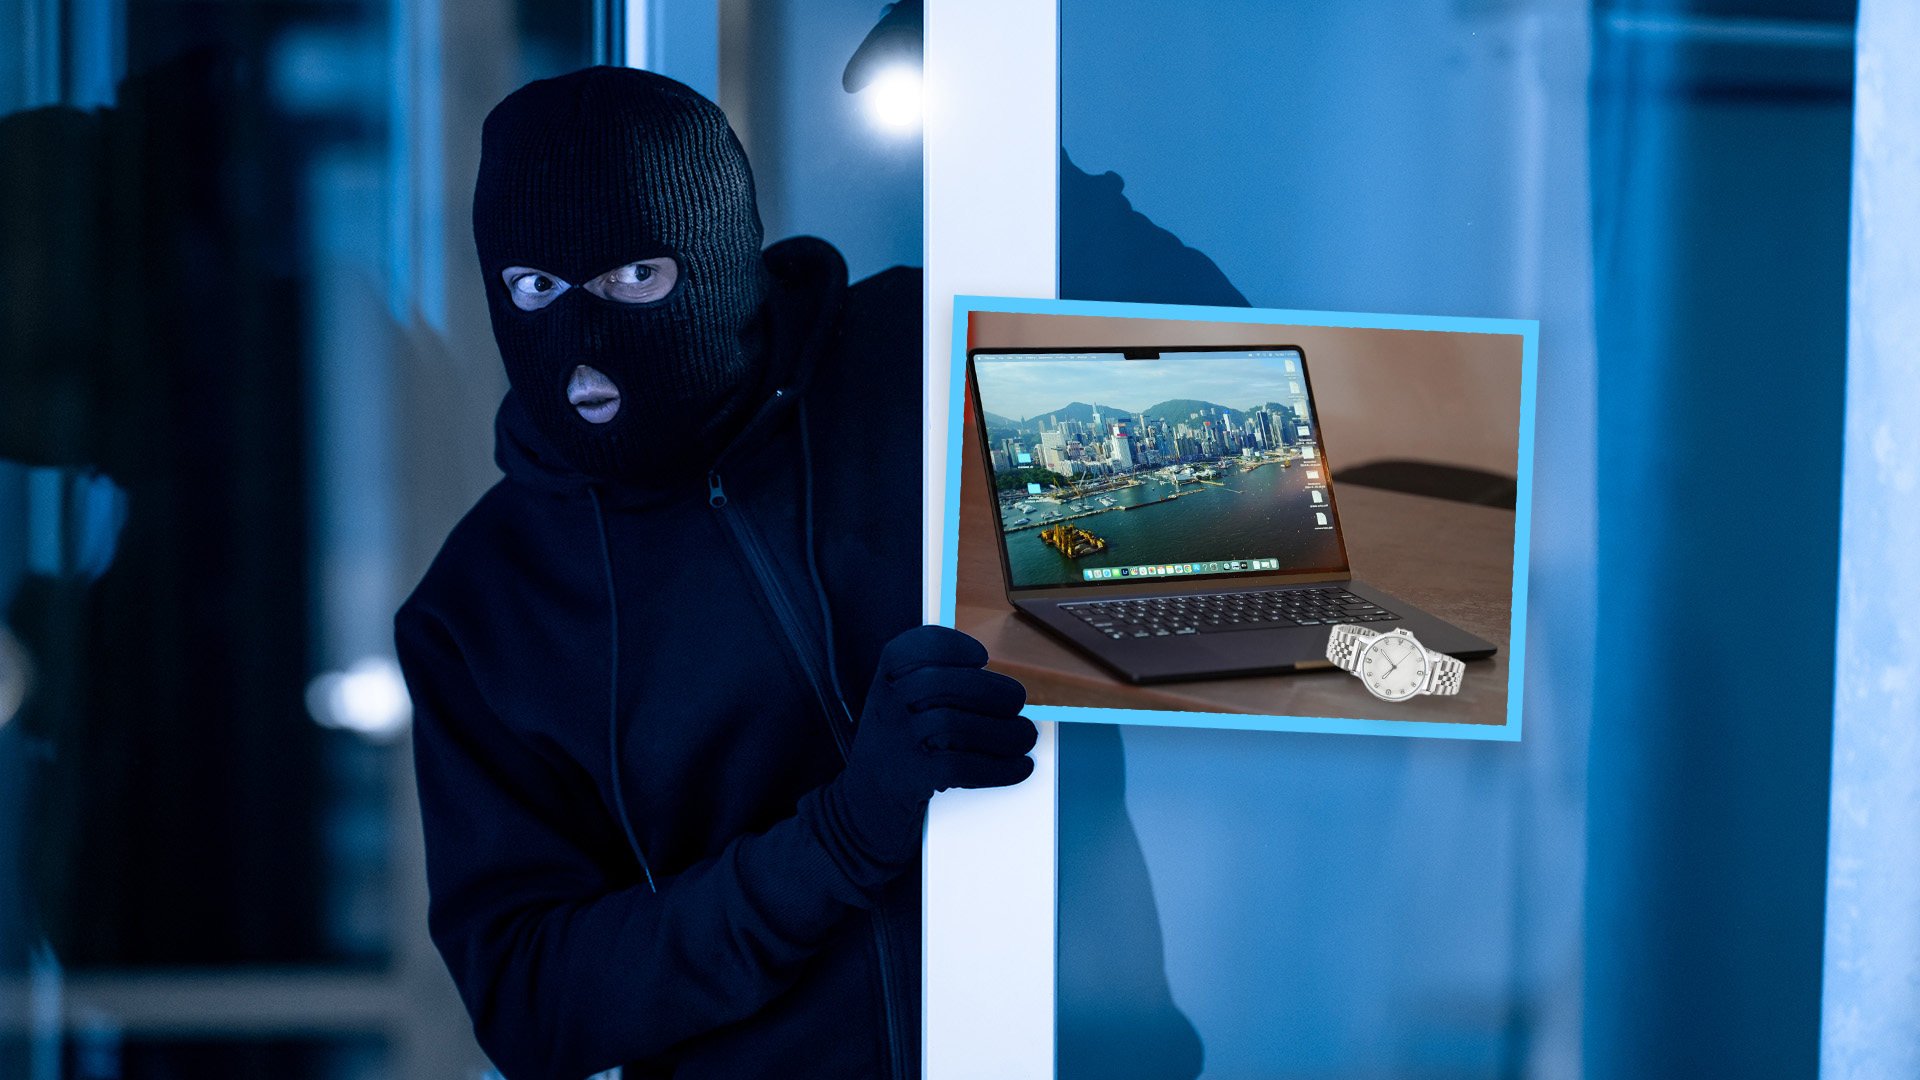 In China, a burglar entered a company premises, taking a watch and laptop but before departing, he surprisingly left a courteous note for the employer, suggesting an upgrade to the security measures in place. Photo: SCMP composite/Shutterstock